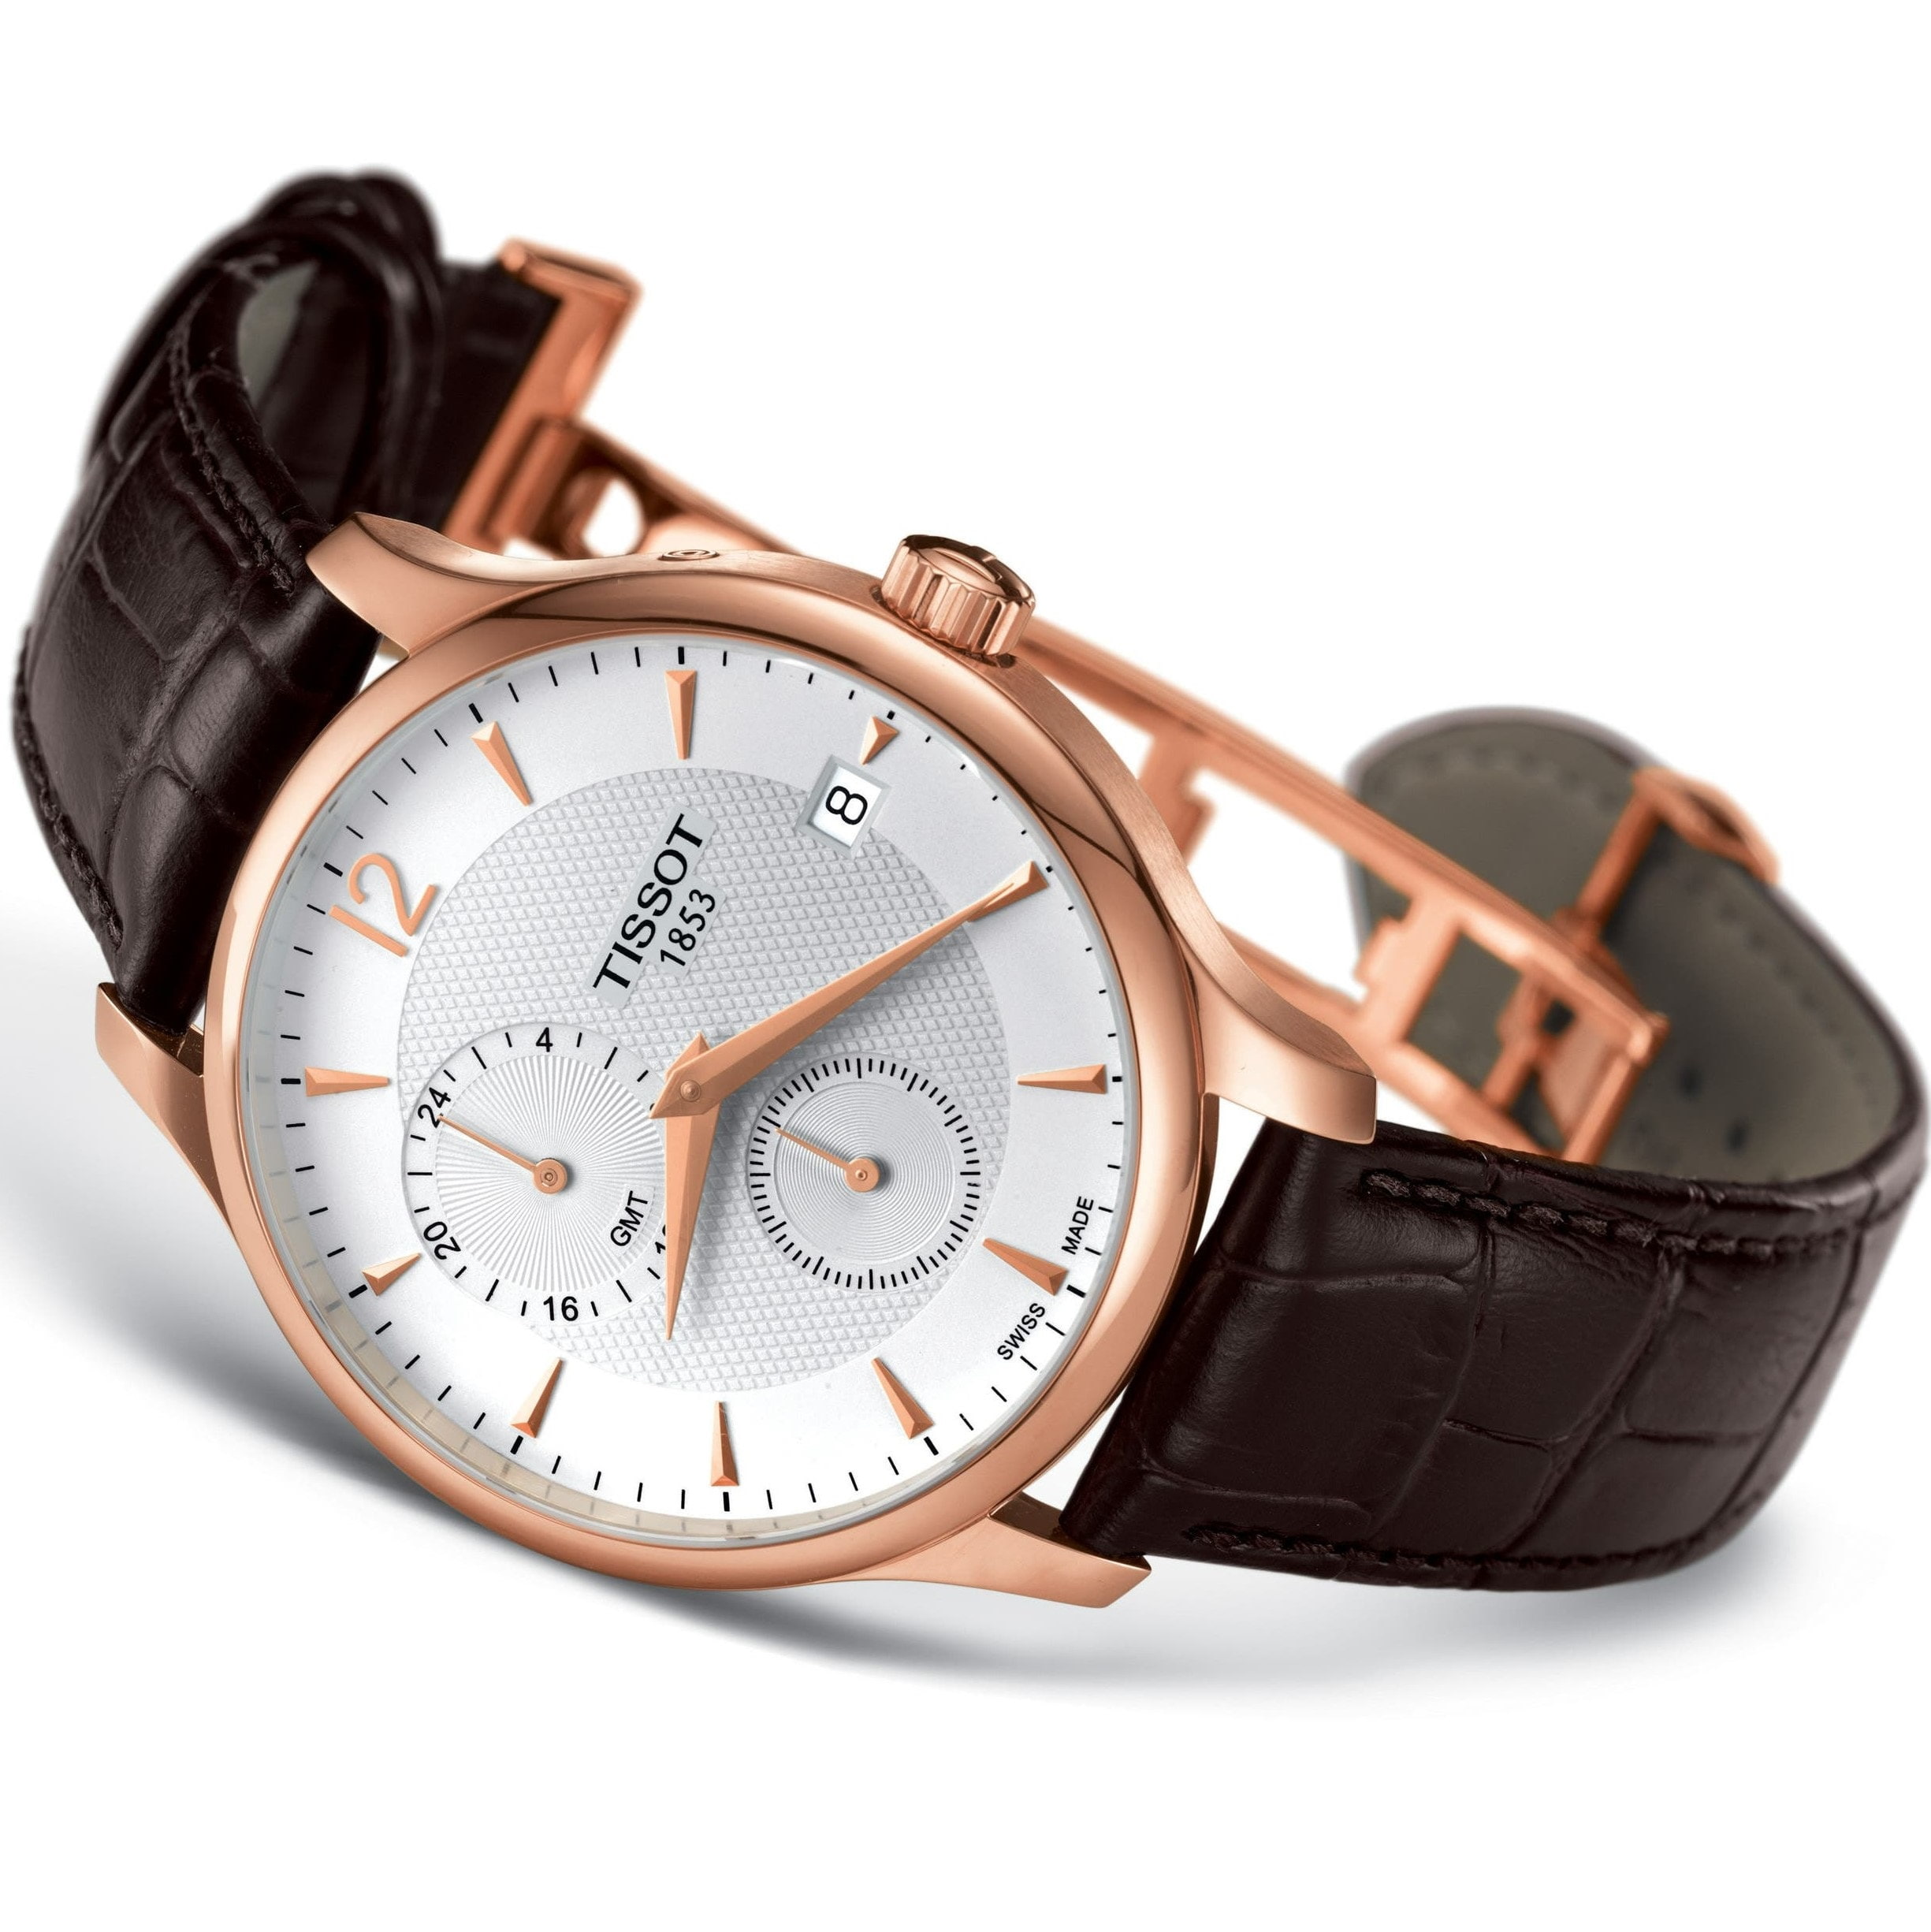 ĐỒNG HỒ NAM DÂY DA TISSOT TRADITION GMT ROSE GOLD LEATHER STRAP WATCH T063.639.36.037.00 9